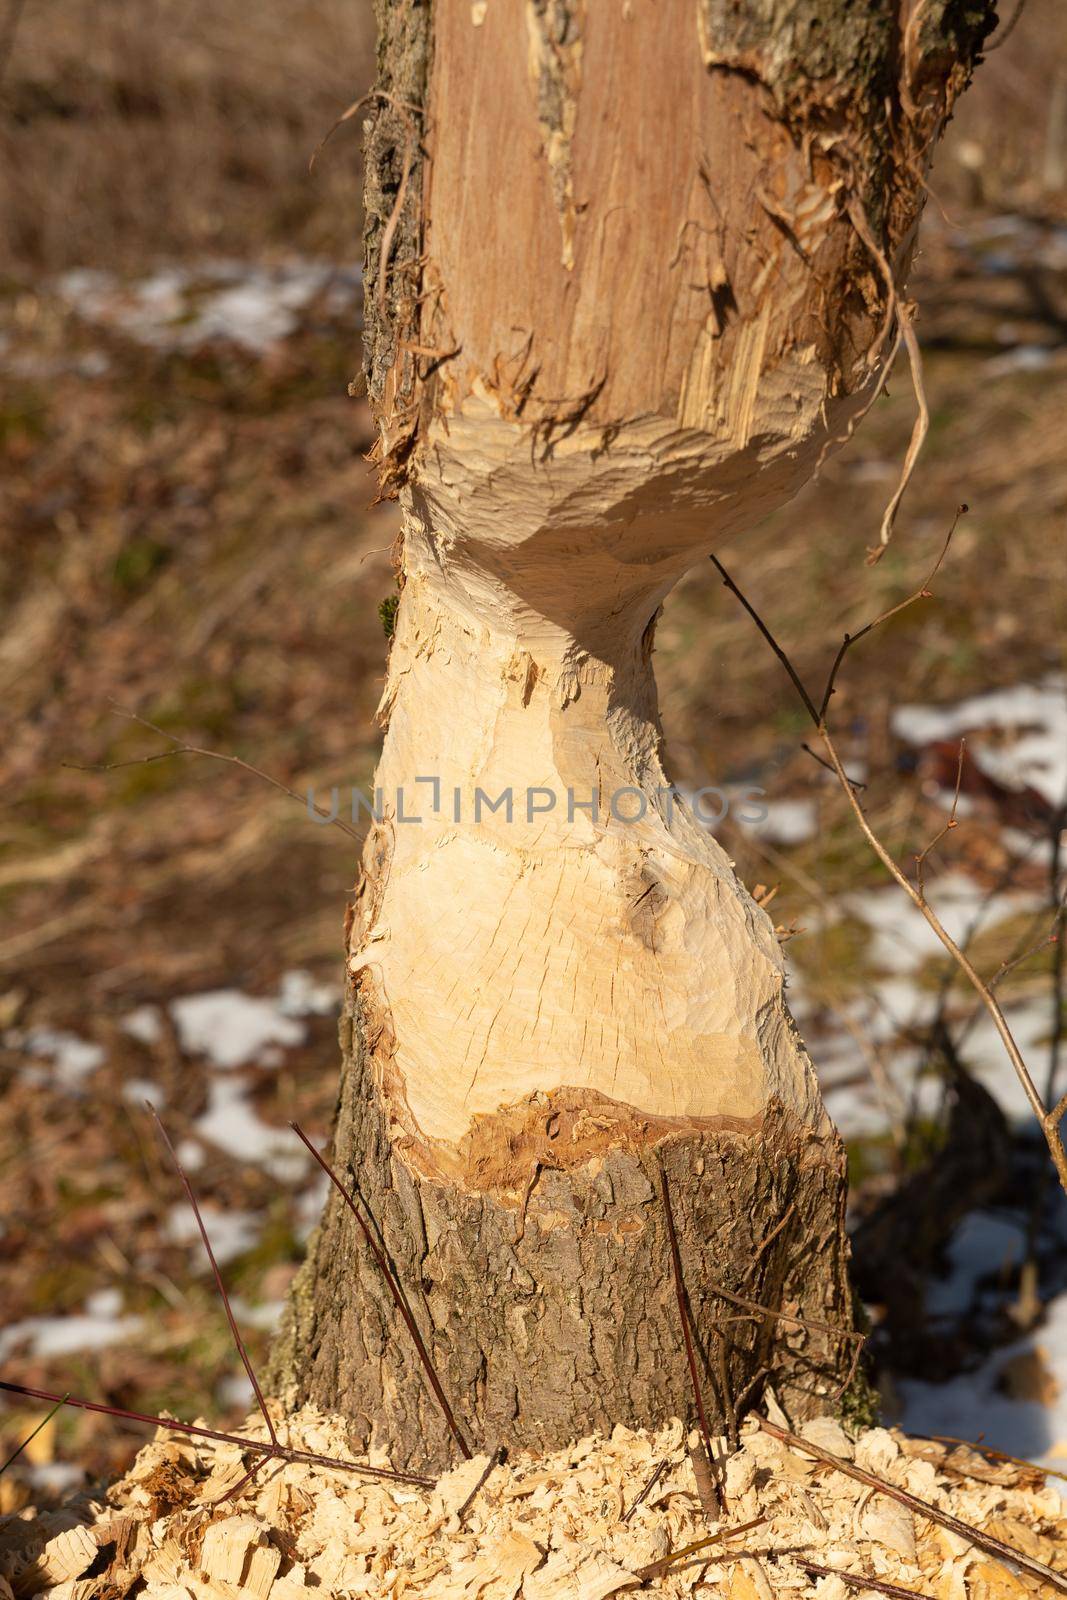 Beaver chewing down a tree. Beavers destruction in Belarus. The beaver work. Beaver is cutting a tree to build a dam. Trees in woods gnawed by beavers. Trunk of large tree gnawed by river animals